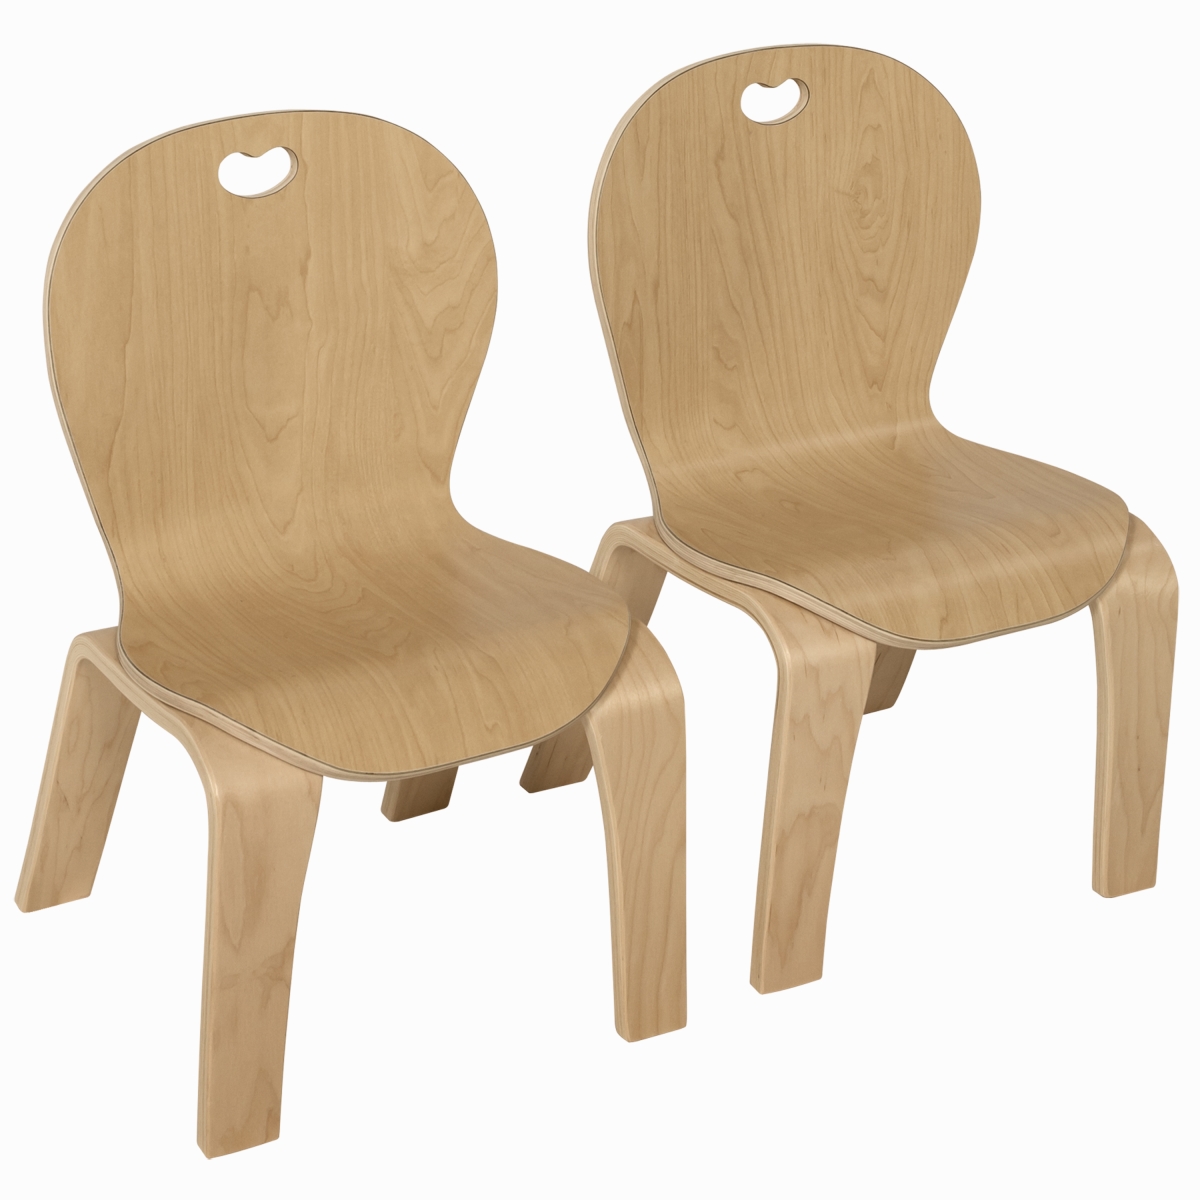 Mh881202 12 In. Bentwood Kids Chair - Set Of 2